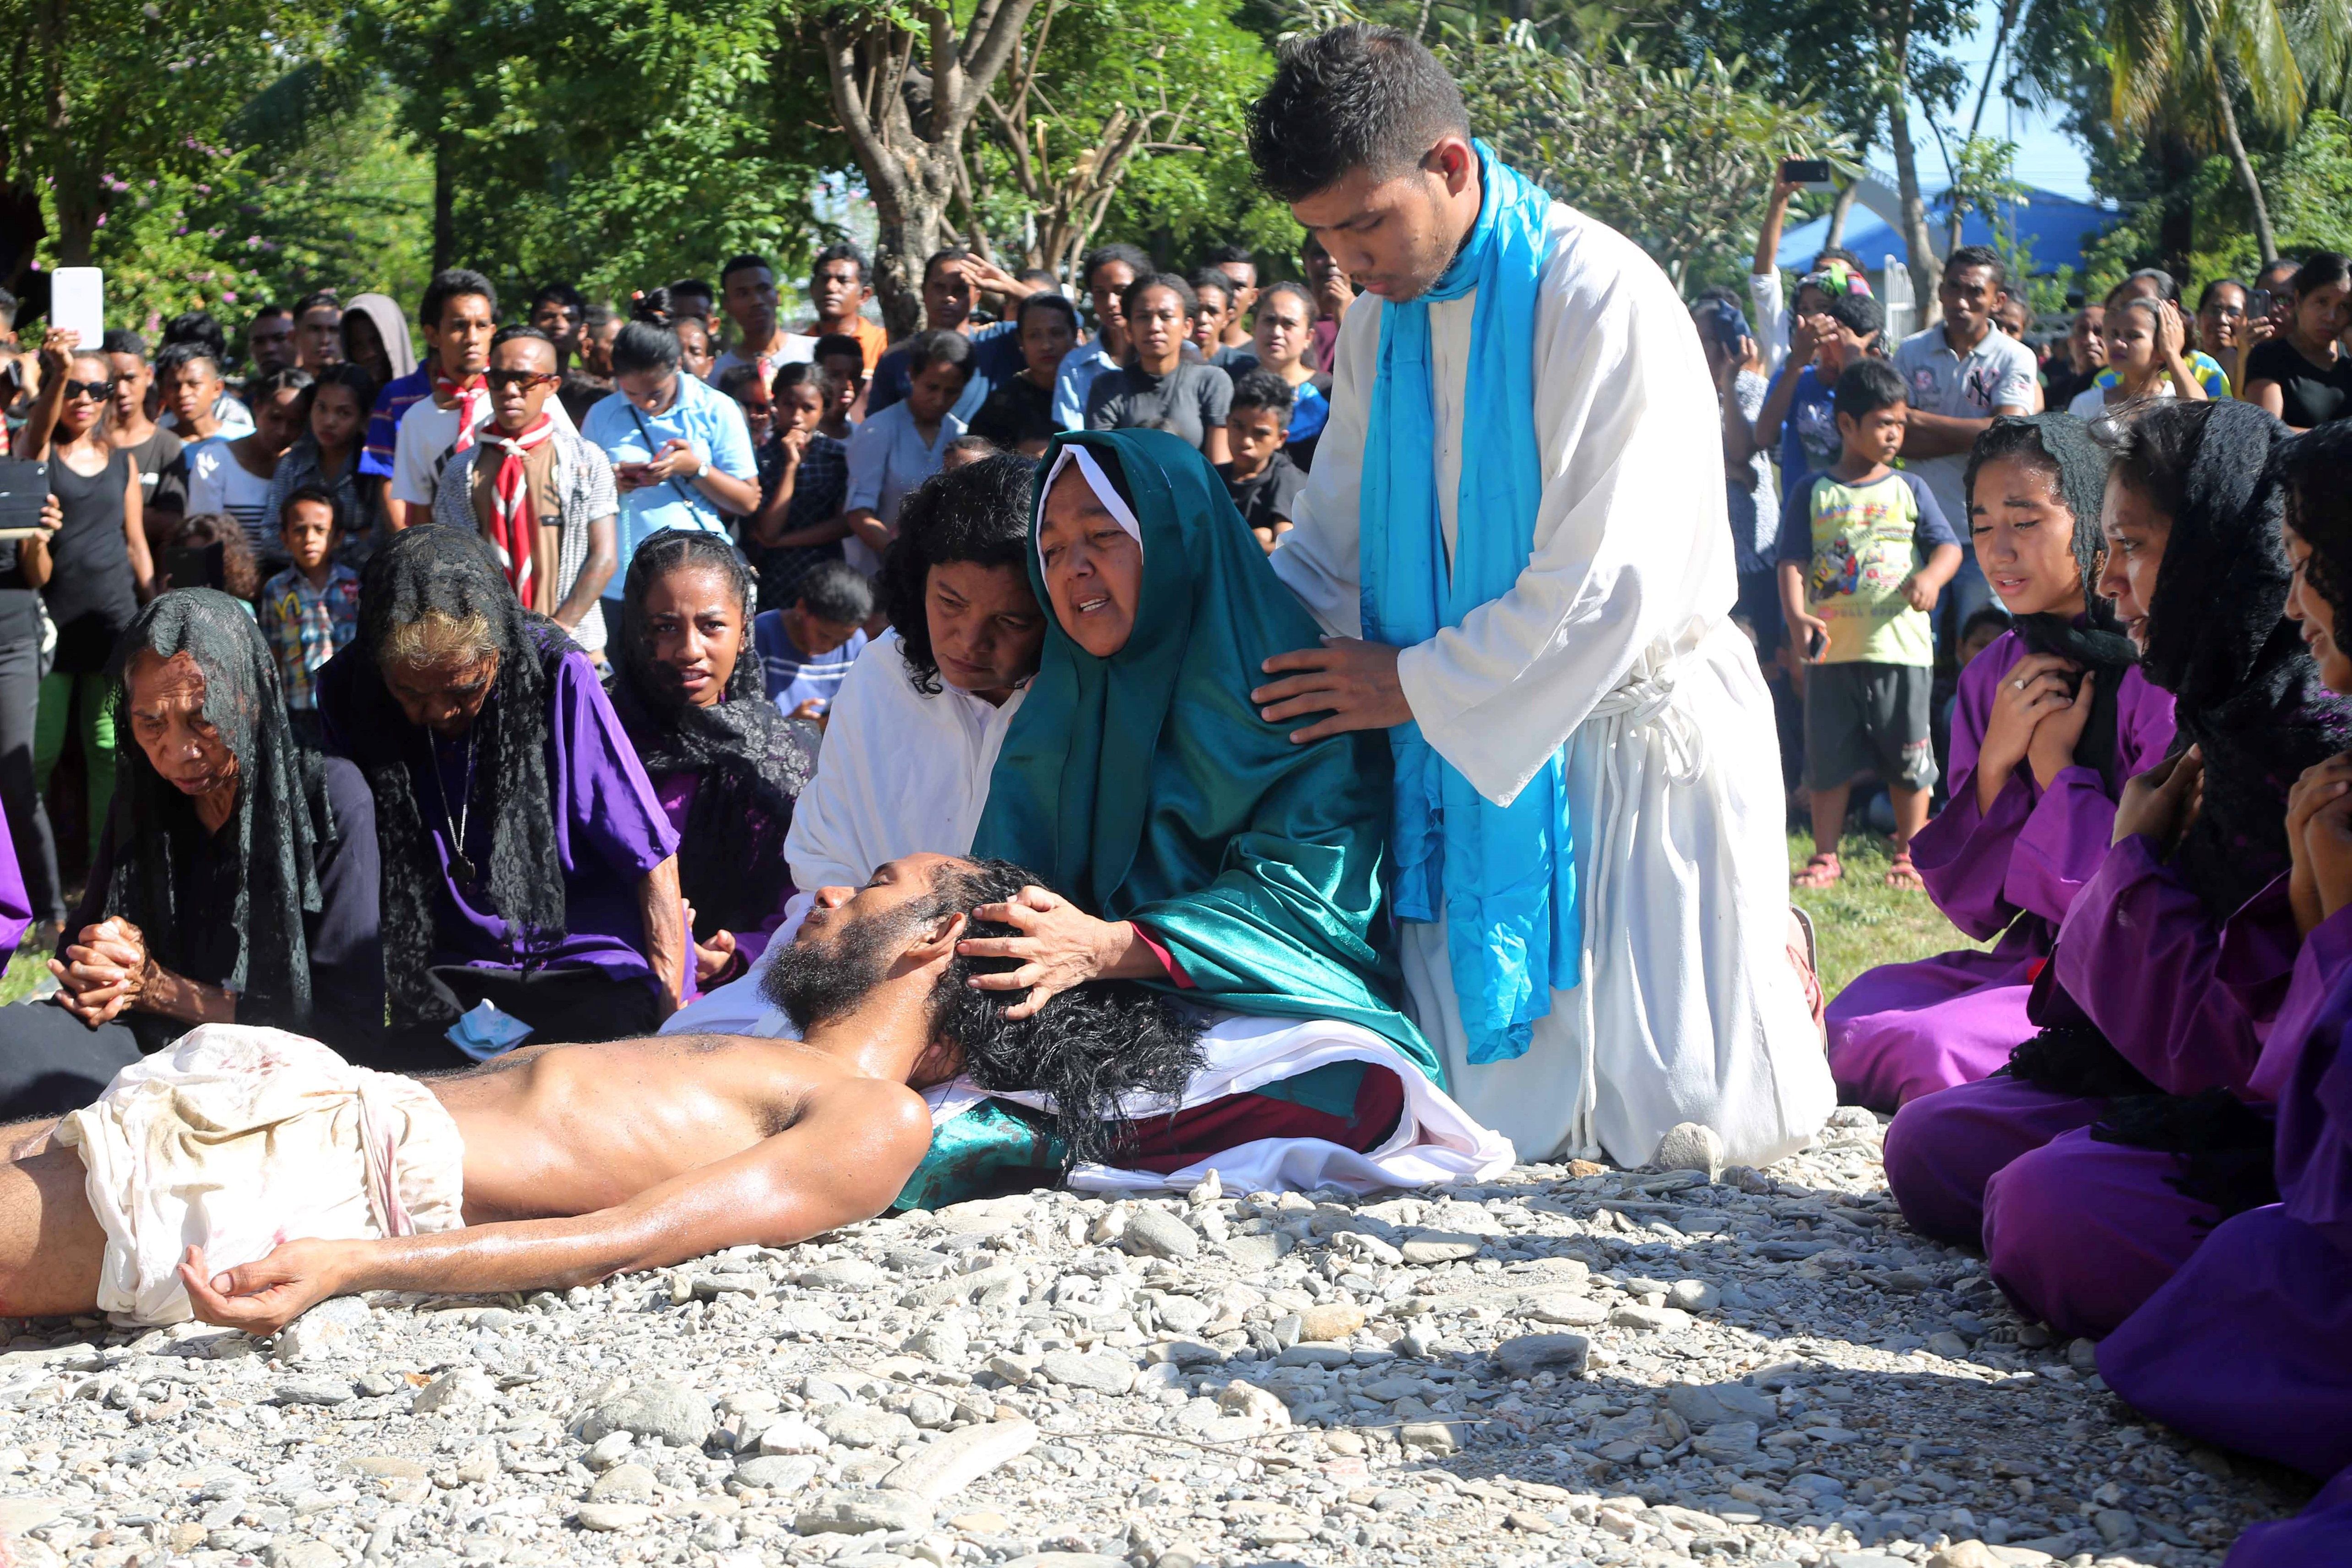 East Timorese Christian devotees re-enact the crucifixion of Jesus Christ to commemorate Good Friday, ahead of Easter, in Dili on March 30, 2018. (VALENTINO DARIELL DE SOUSA/AFP/Getty Images)